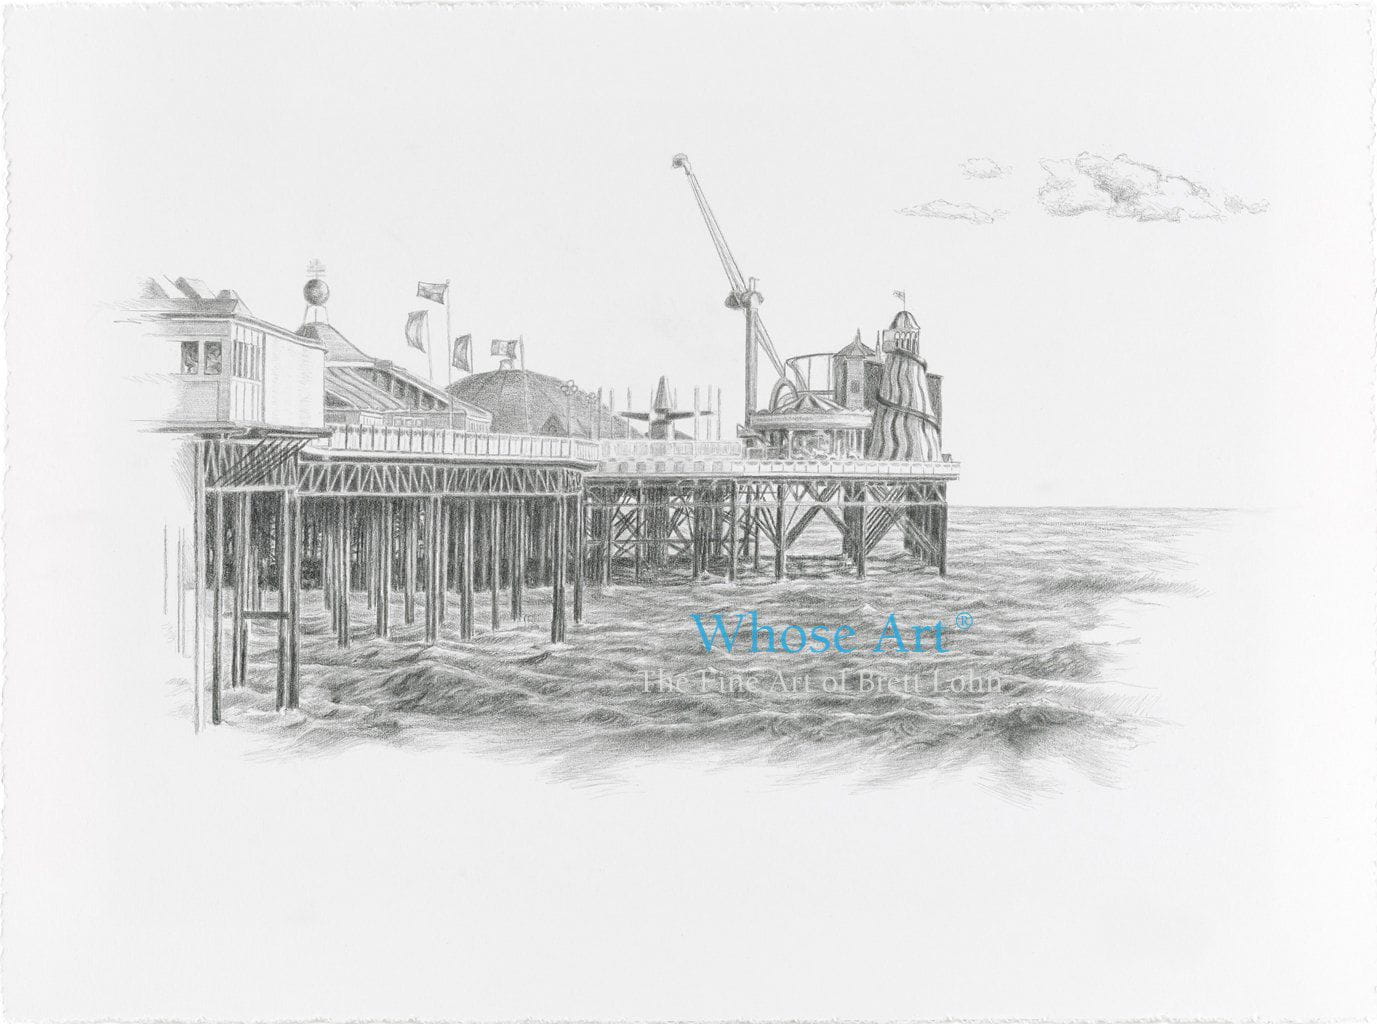 Black and white art print of Brighton showing the Palace Pier fairground viewed from the shore. Drawn in pencil on paper.